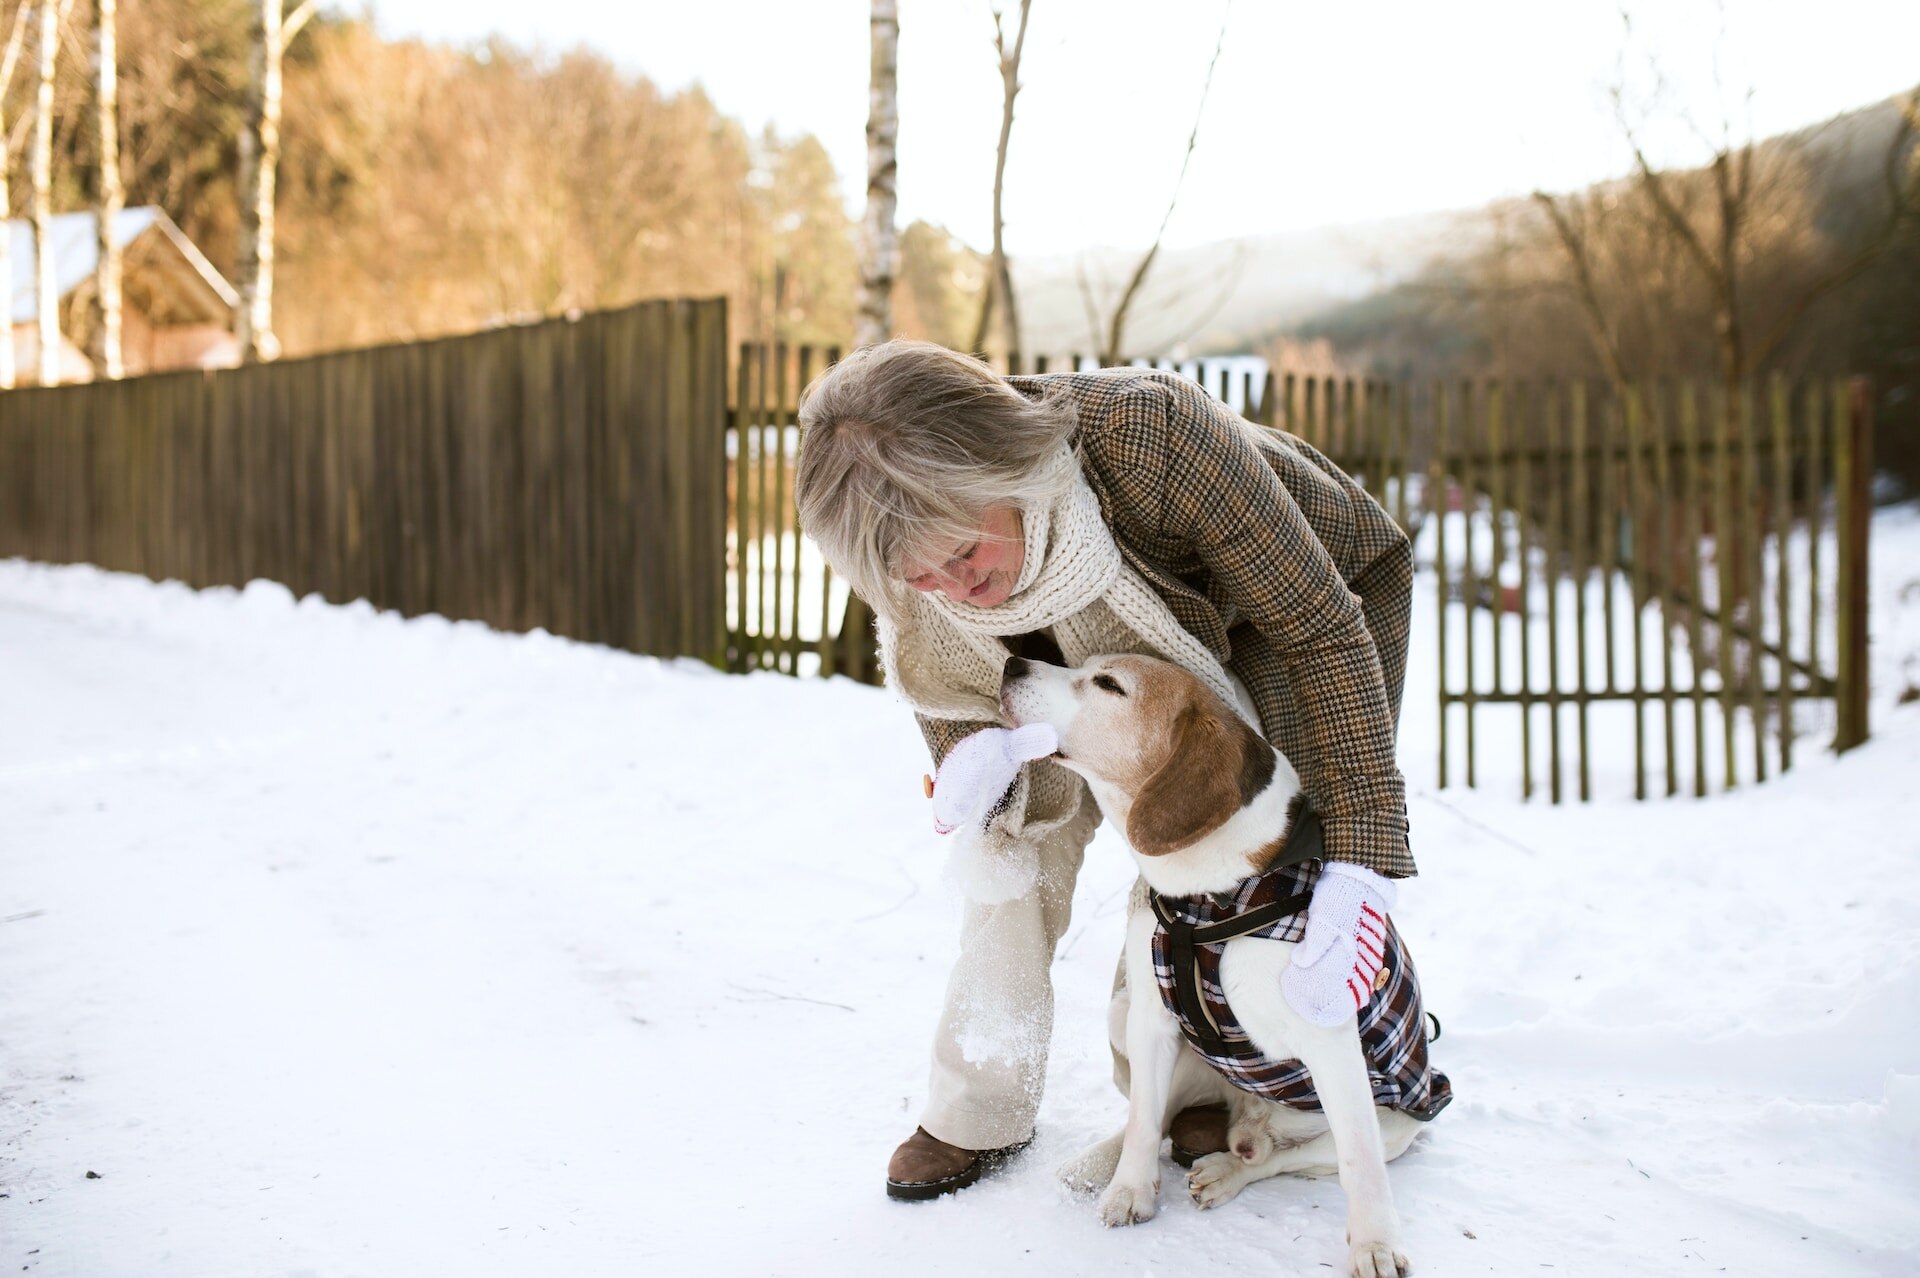 A woman playing with a dog outdoors in the snow in a fenced backyard